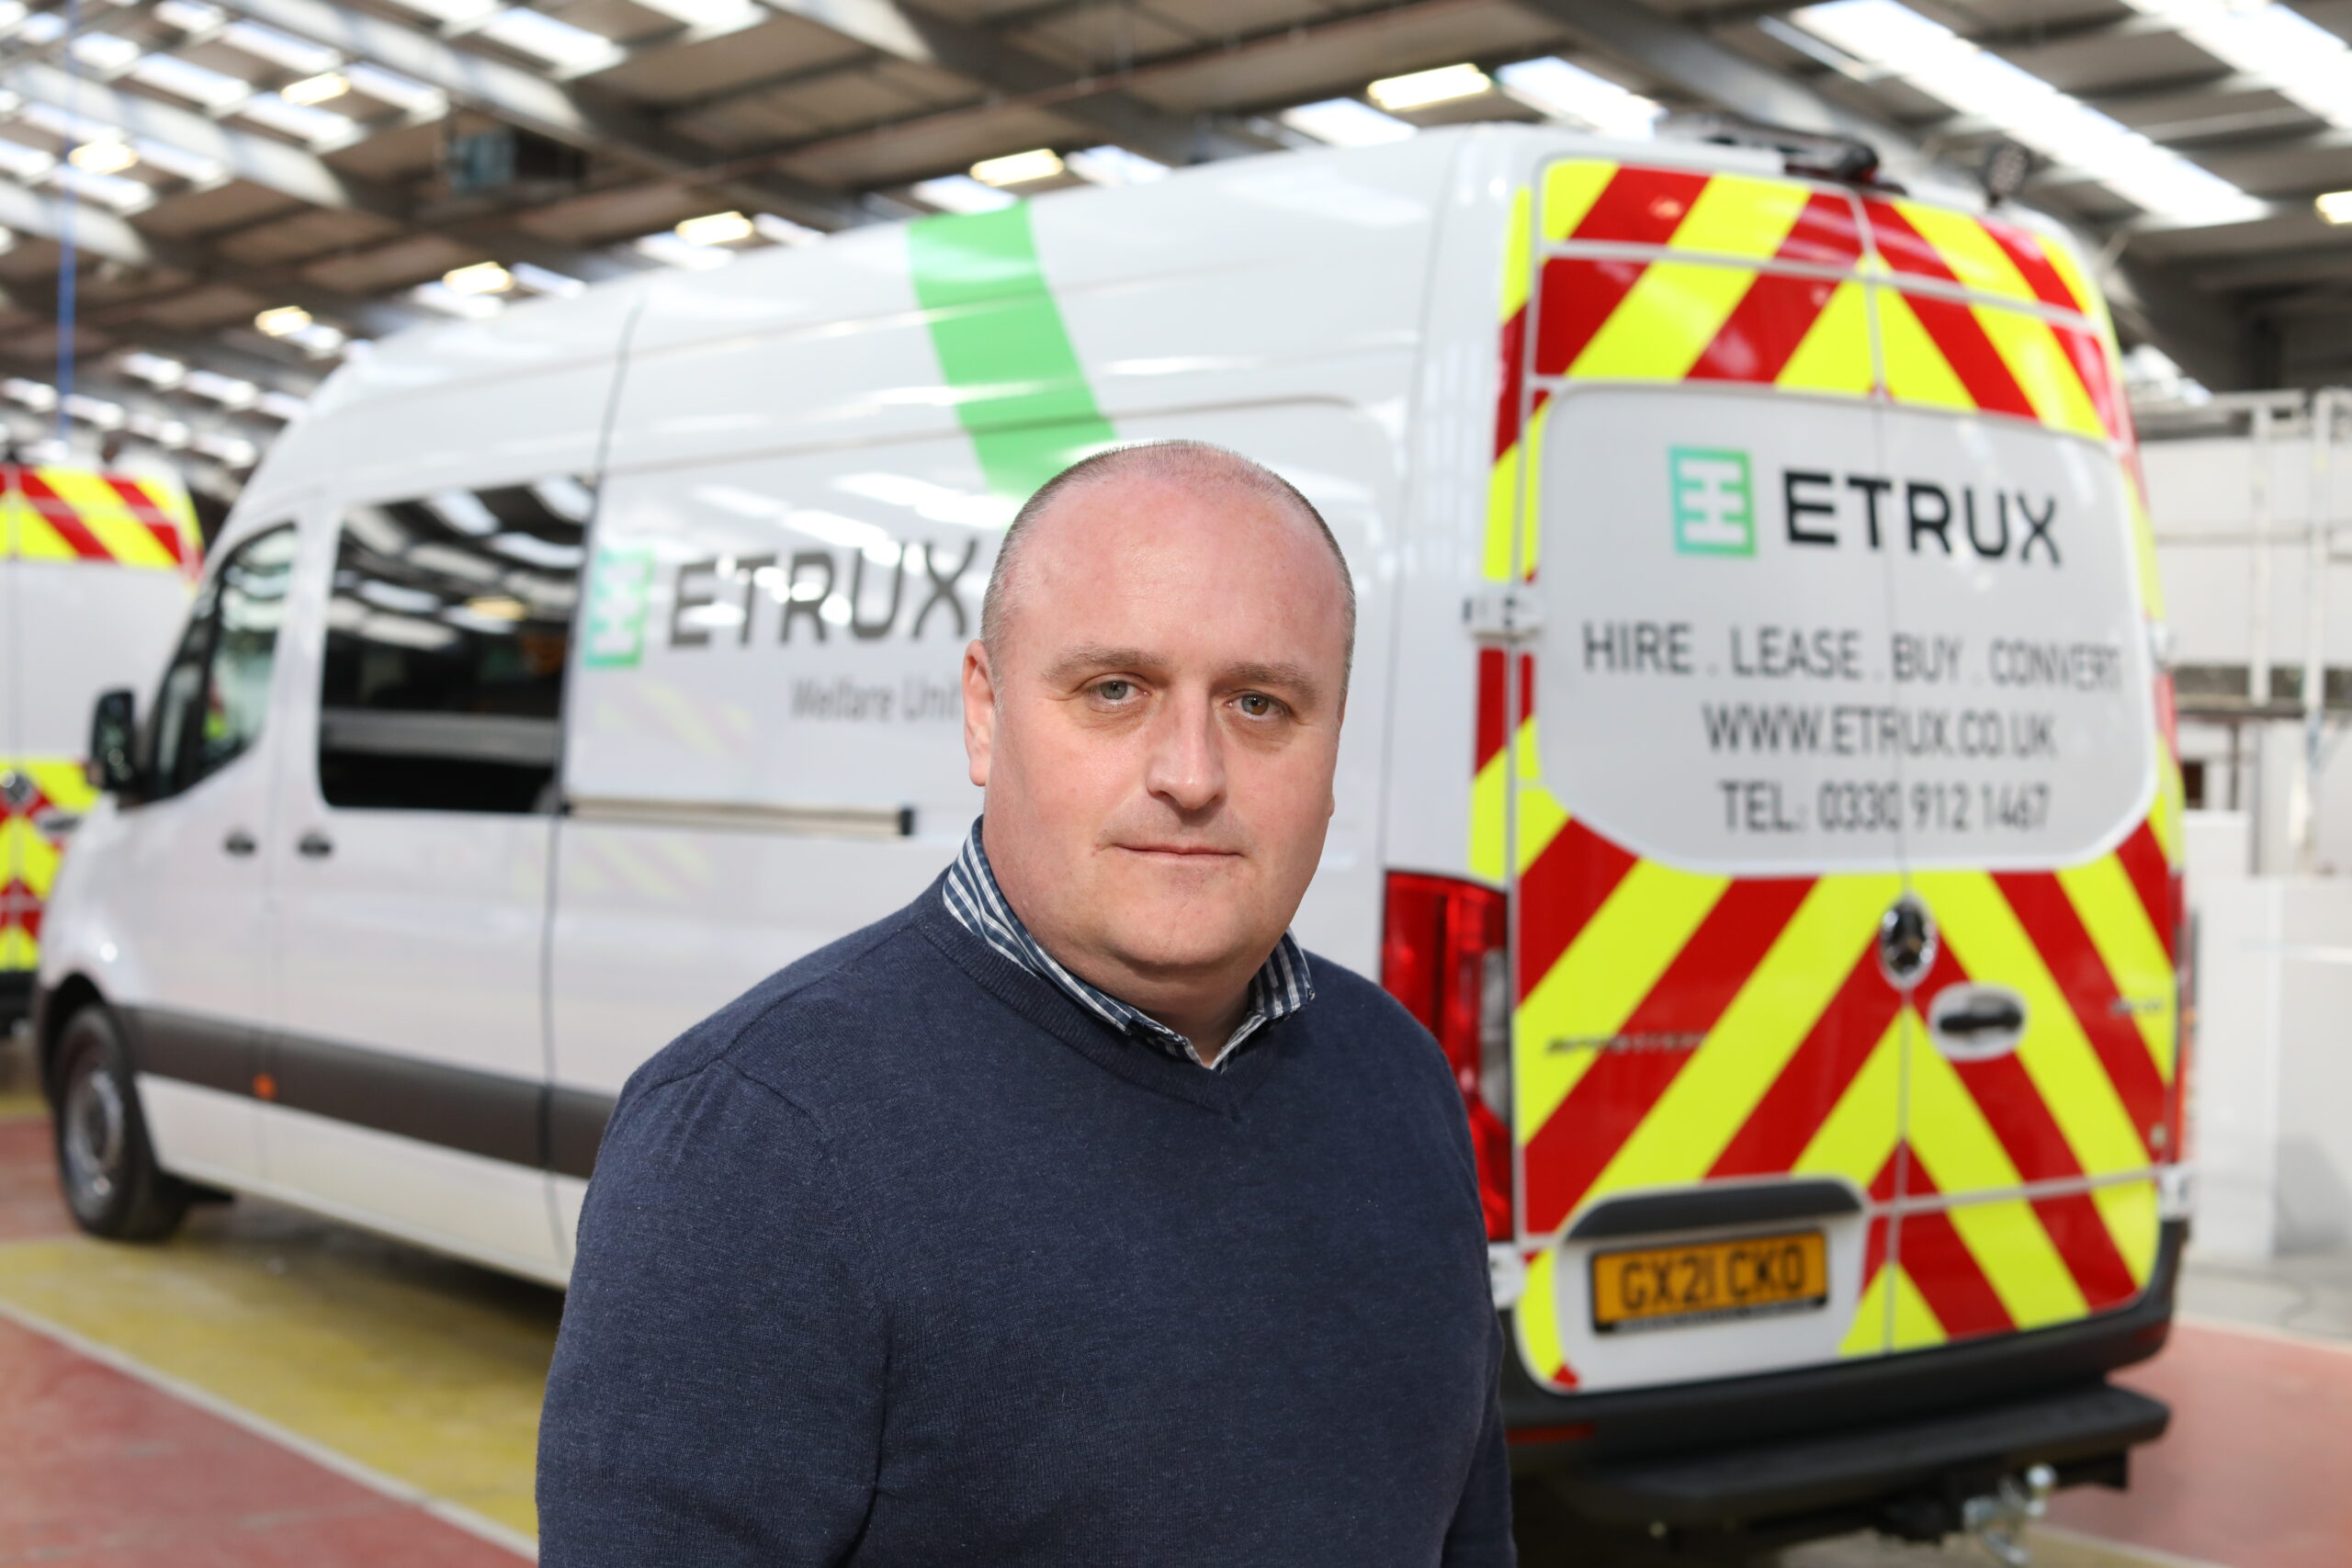 ETRUX MD Calls for Greater Collaboration in Journey to Net Zero